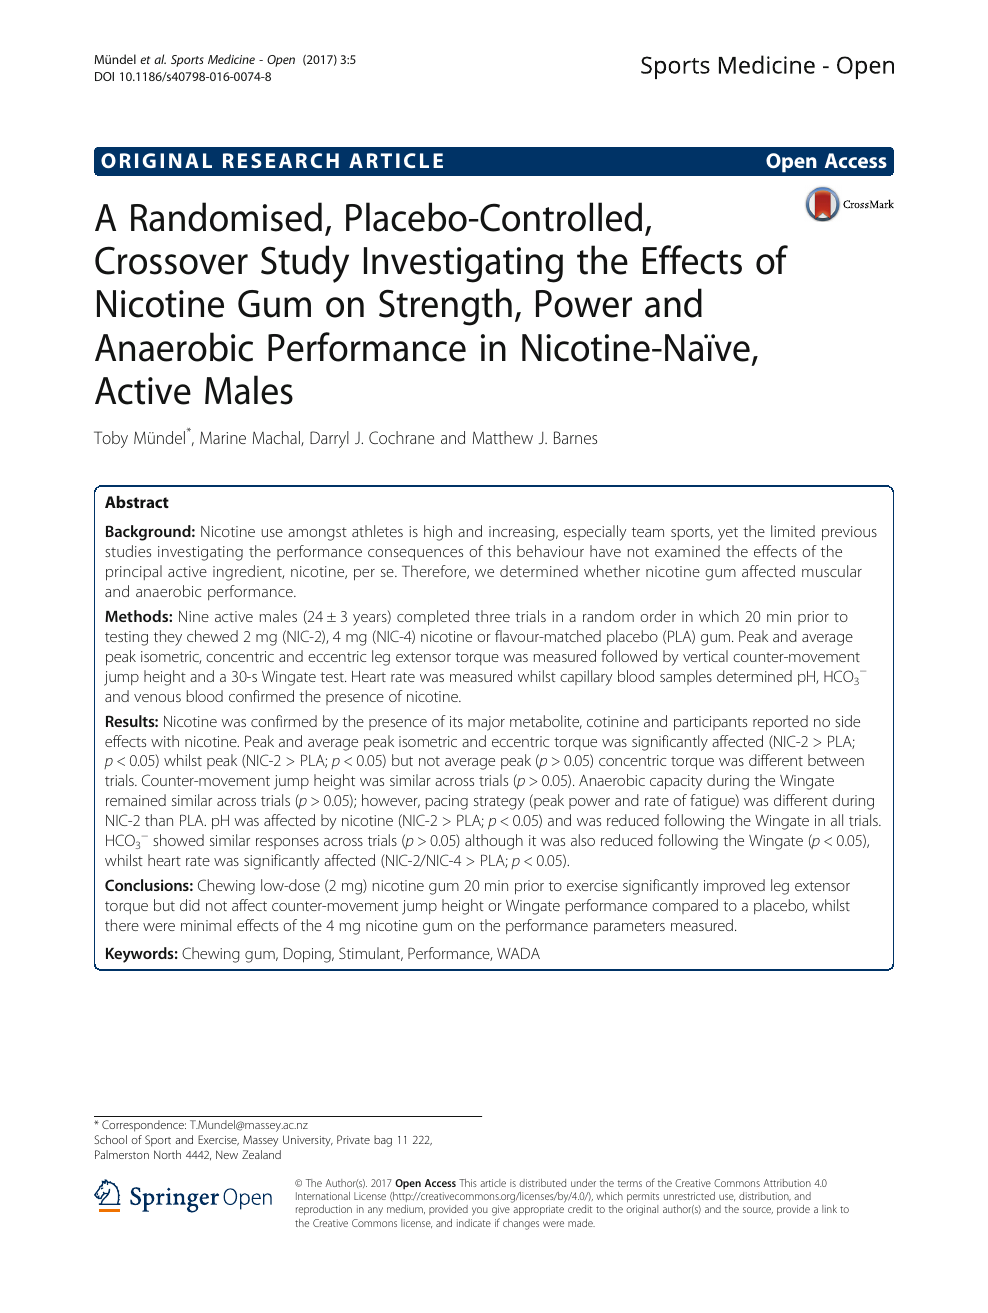 A Randomised, Placebo-Controlled, Crossover Study Investigating the Effects of Nicotine Gum on Strength, Power and Anaerobic Performance in Nicotine-Naïve, Active Males